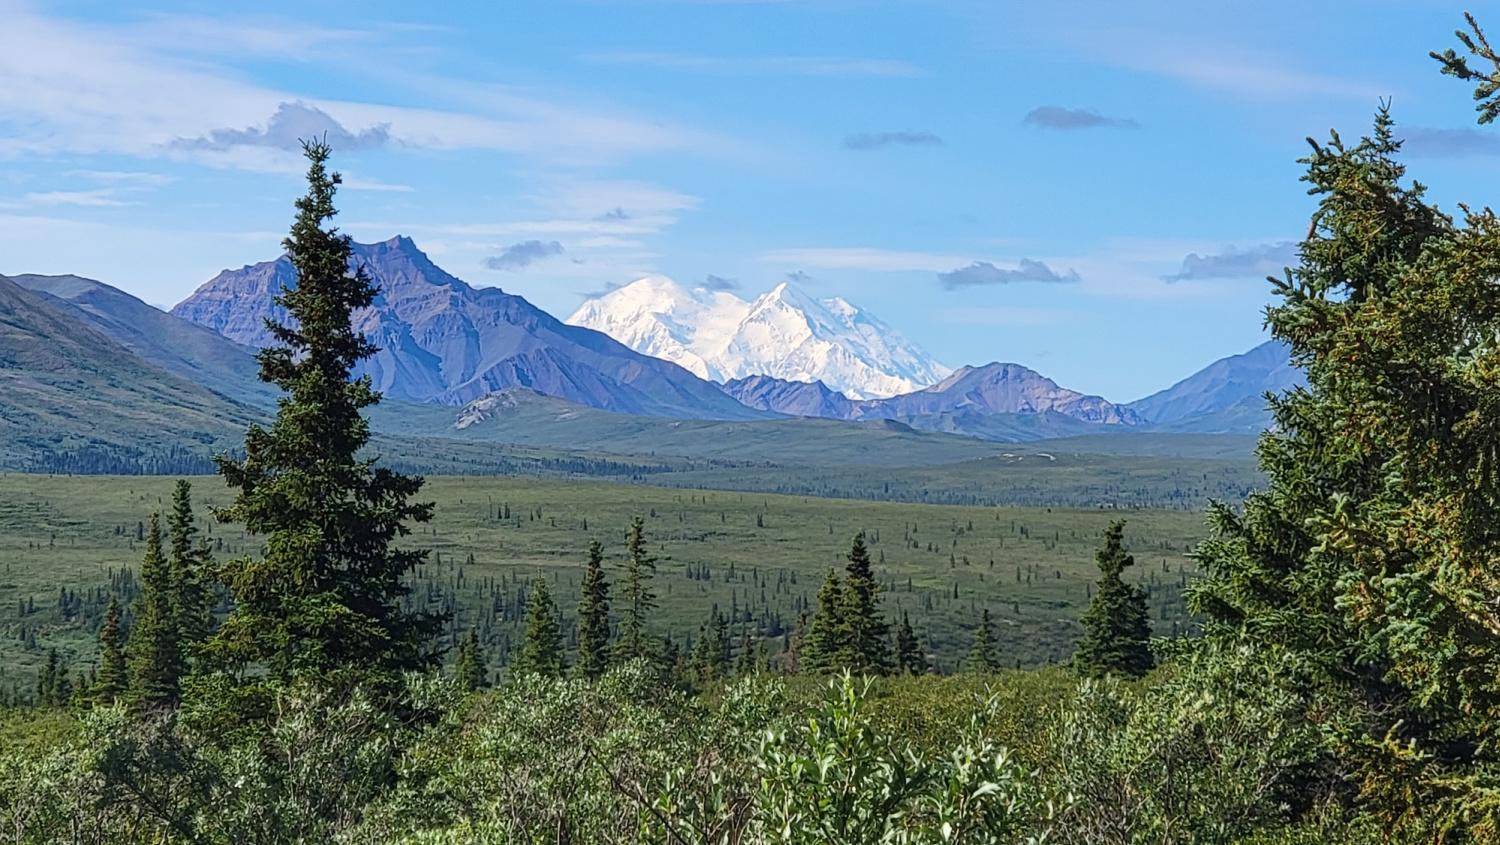 Mount Denali seen from the park road